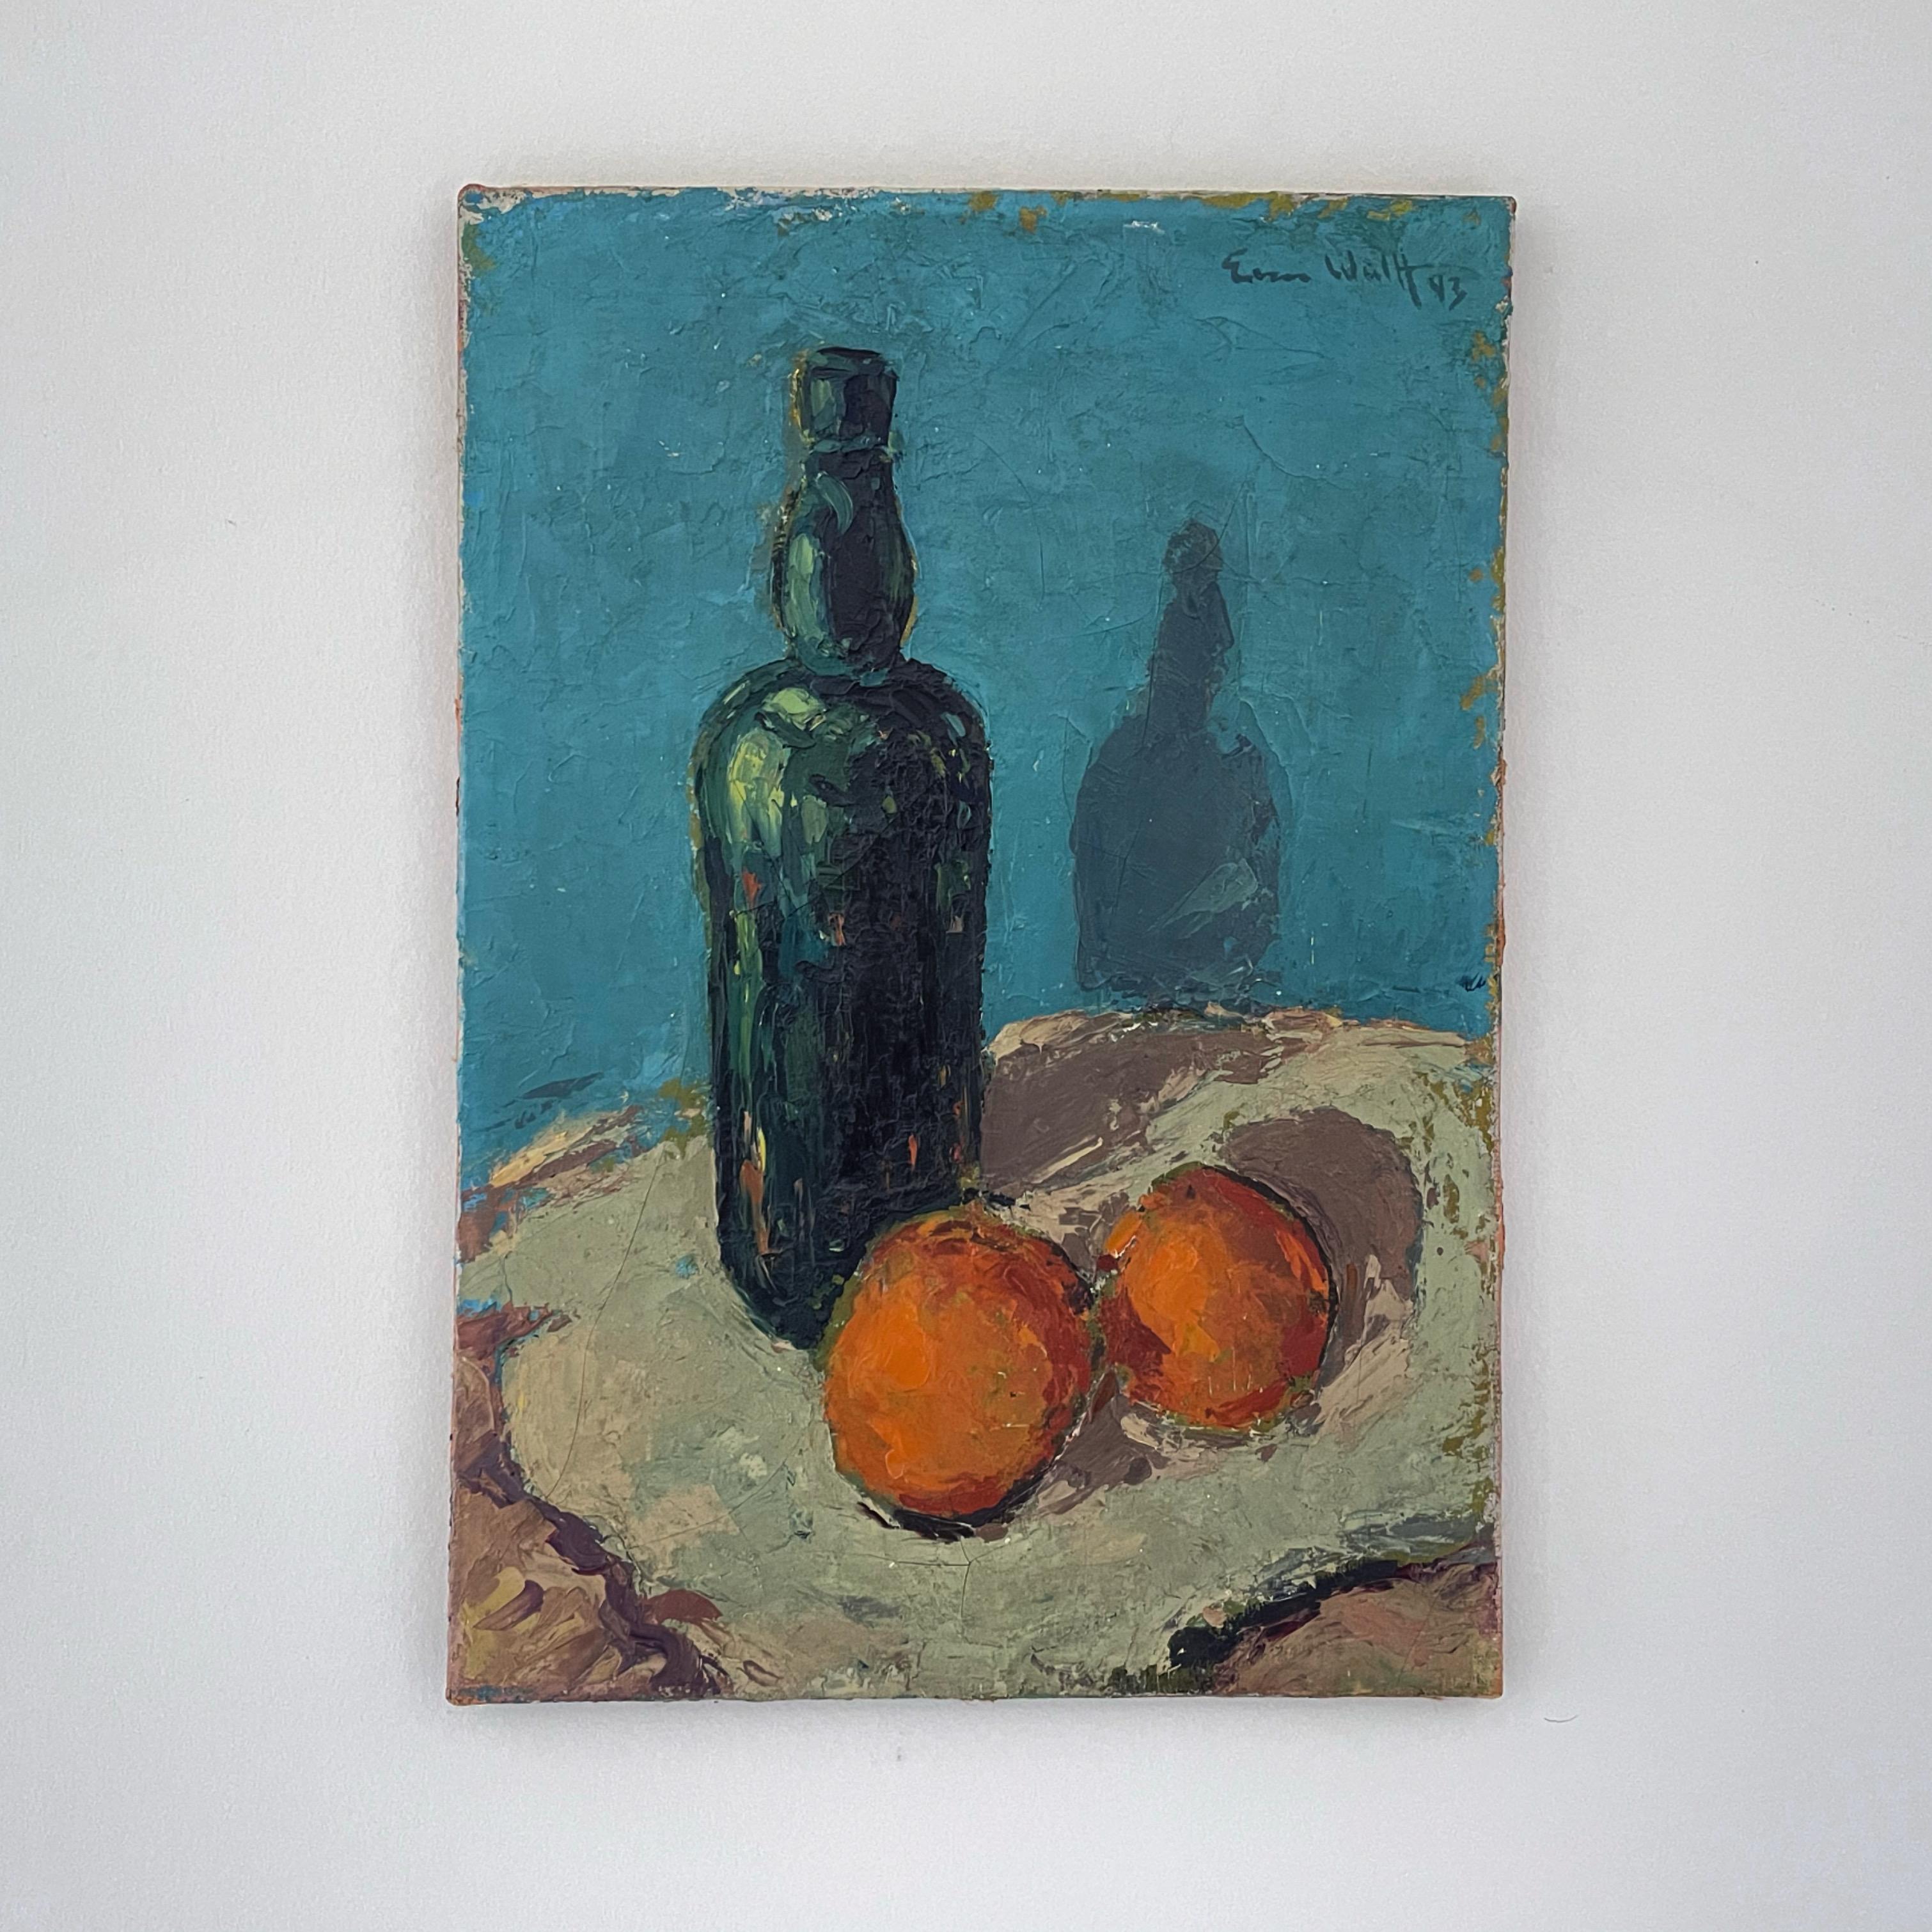 1943 War Period Textured Still Life Of Table With Oranges And Bottle For Sale 6